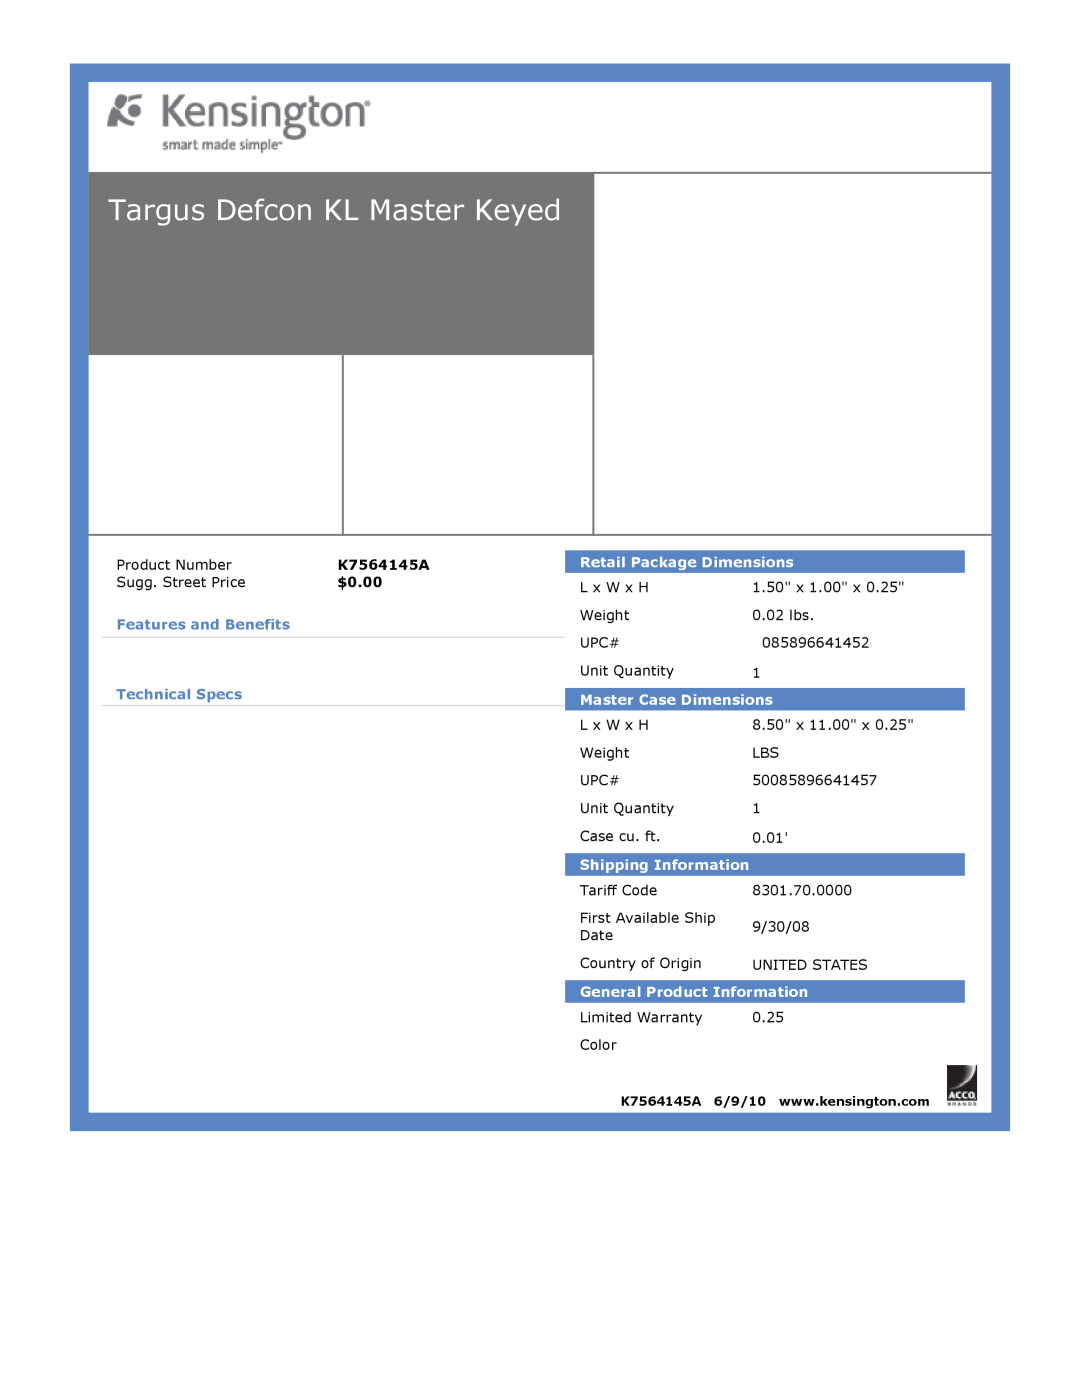 Kensington EU64325 Targus Defcon KL Master Keyed, $0.00, Features and Benefits Technical Specs, Retail Package Dimensions 